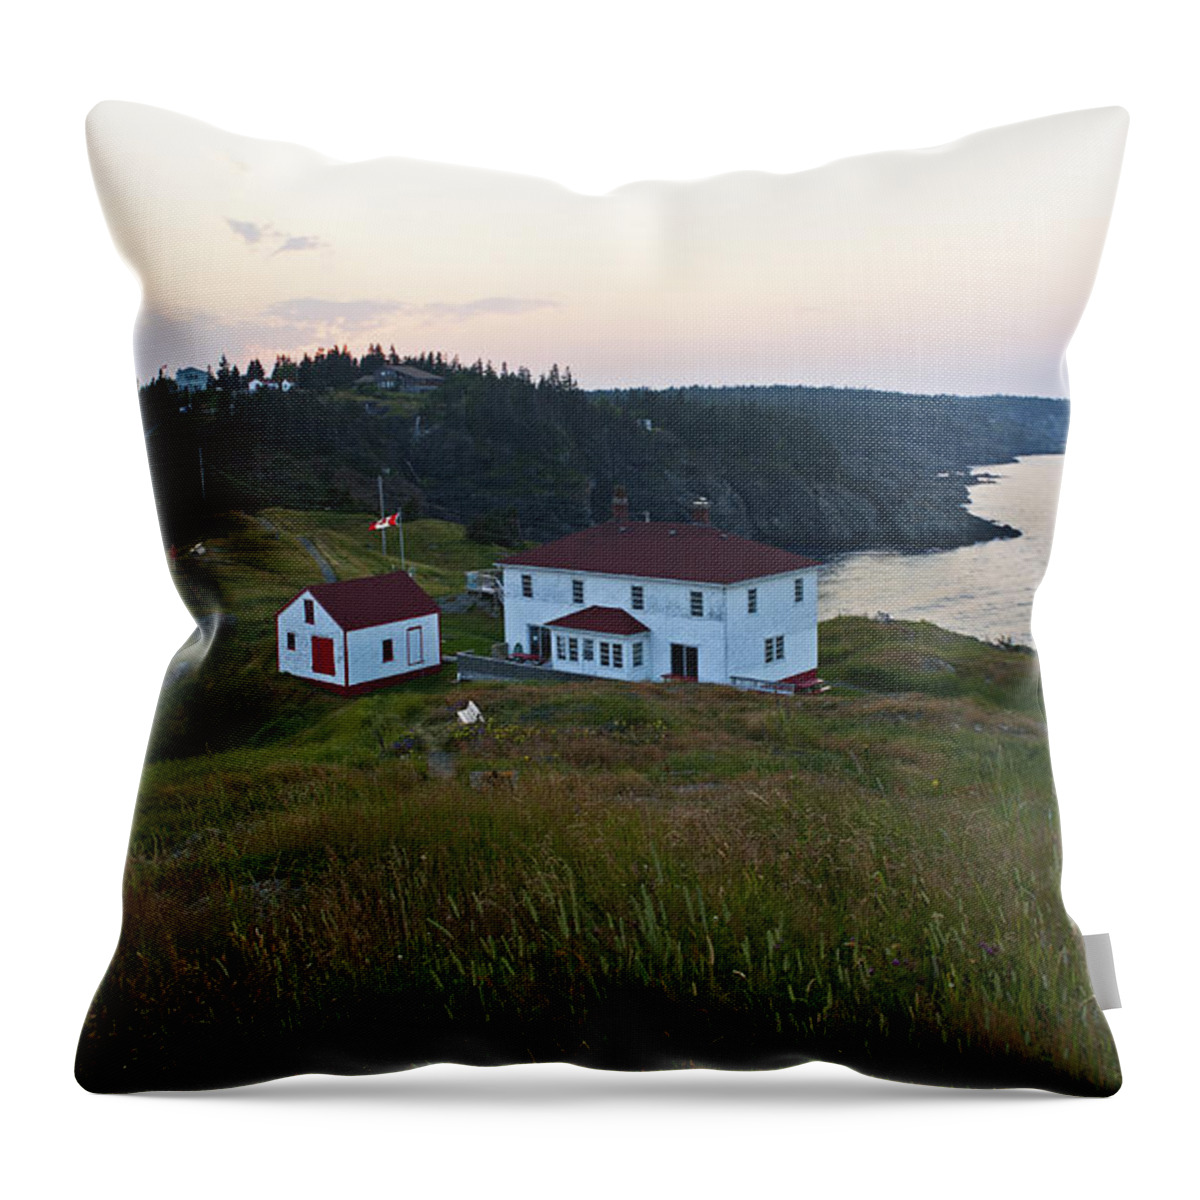 Festblues Throw Pillow featuring the photograph Swallowtail Keepers... by Nina Stavlund